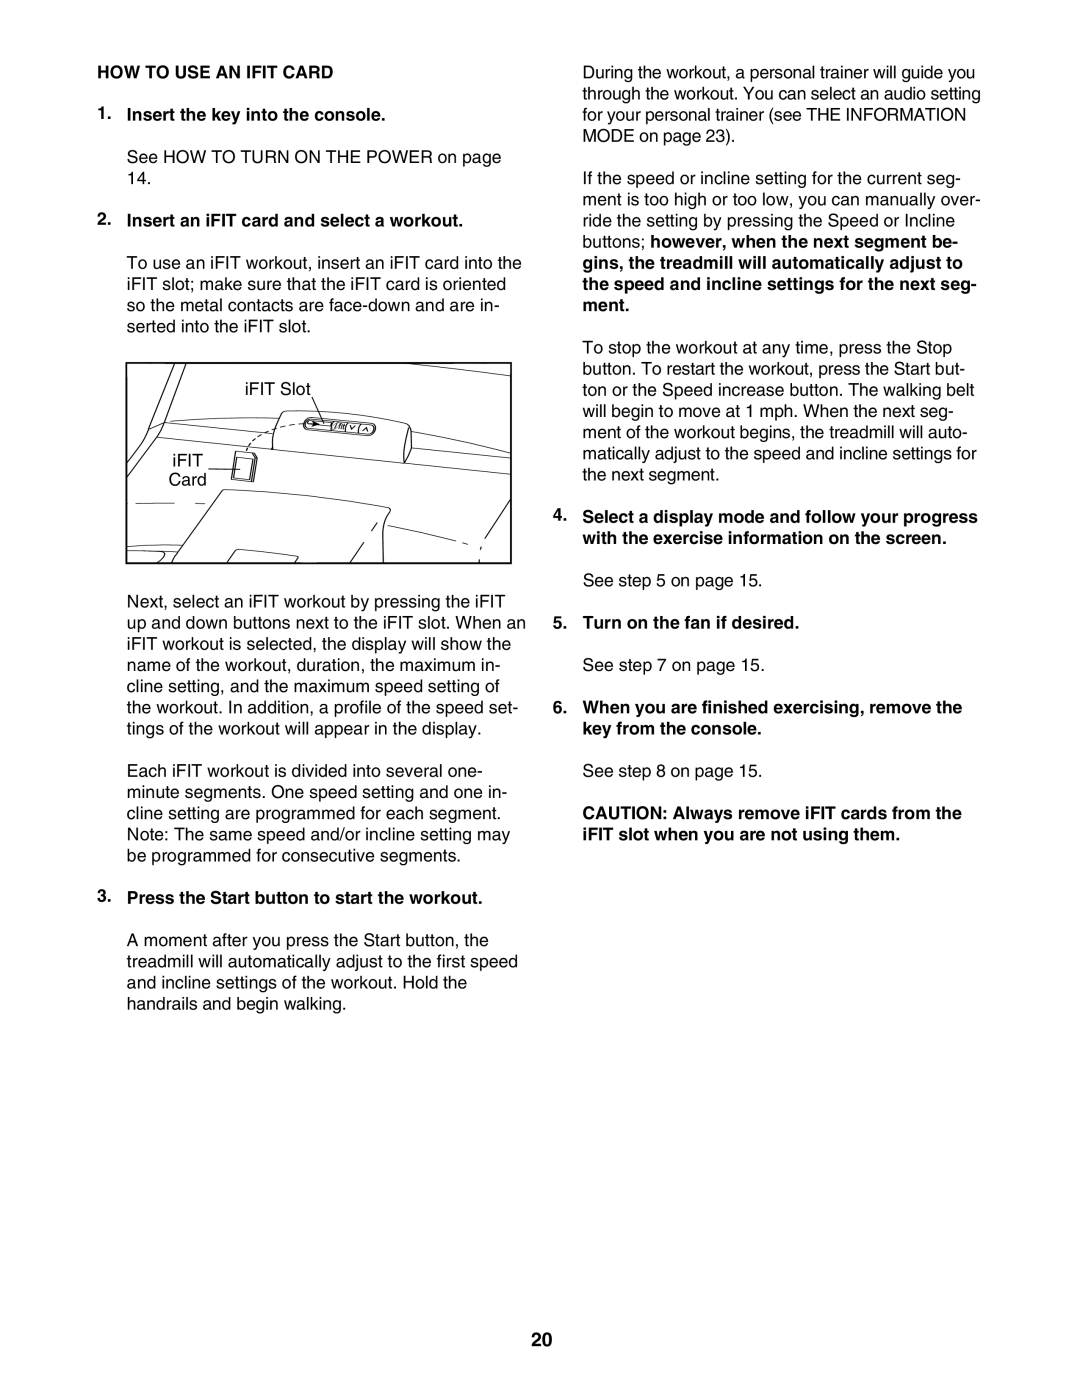 NordicTrack NTL19007.0 user manual HOW to USE AN Ifit Card, Insert an iFIT card and select a workout 